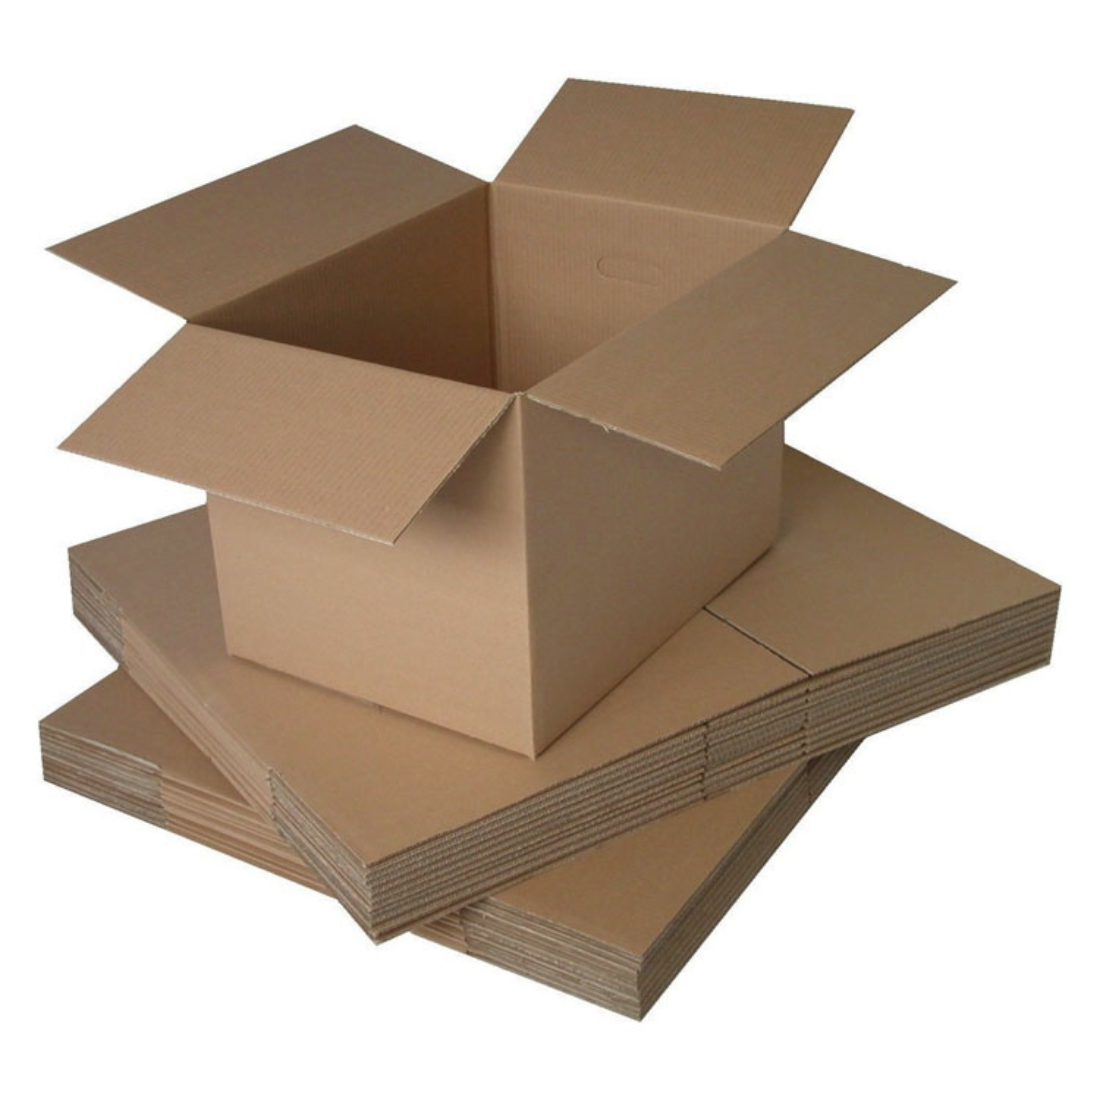 3 Ply Brown Corrugated Box For Packing (10.23X9.44X1 inches) - Pack of 25 Boxes